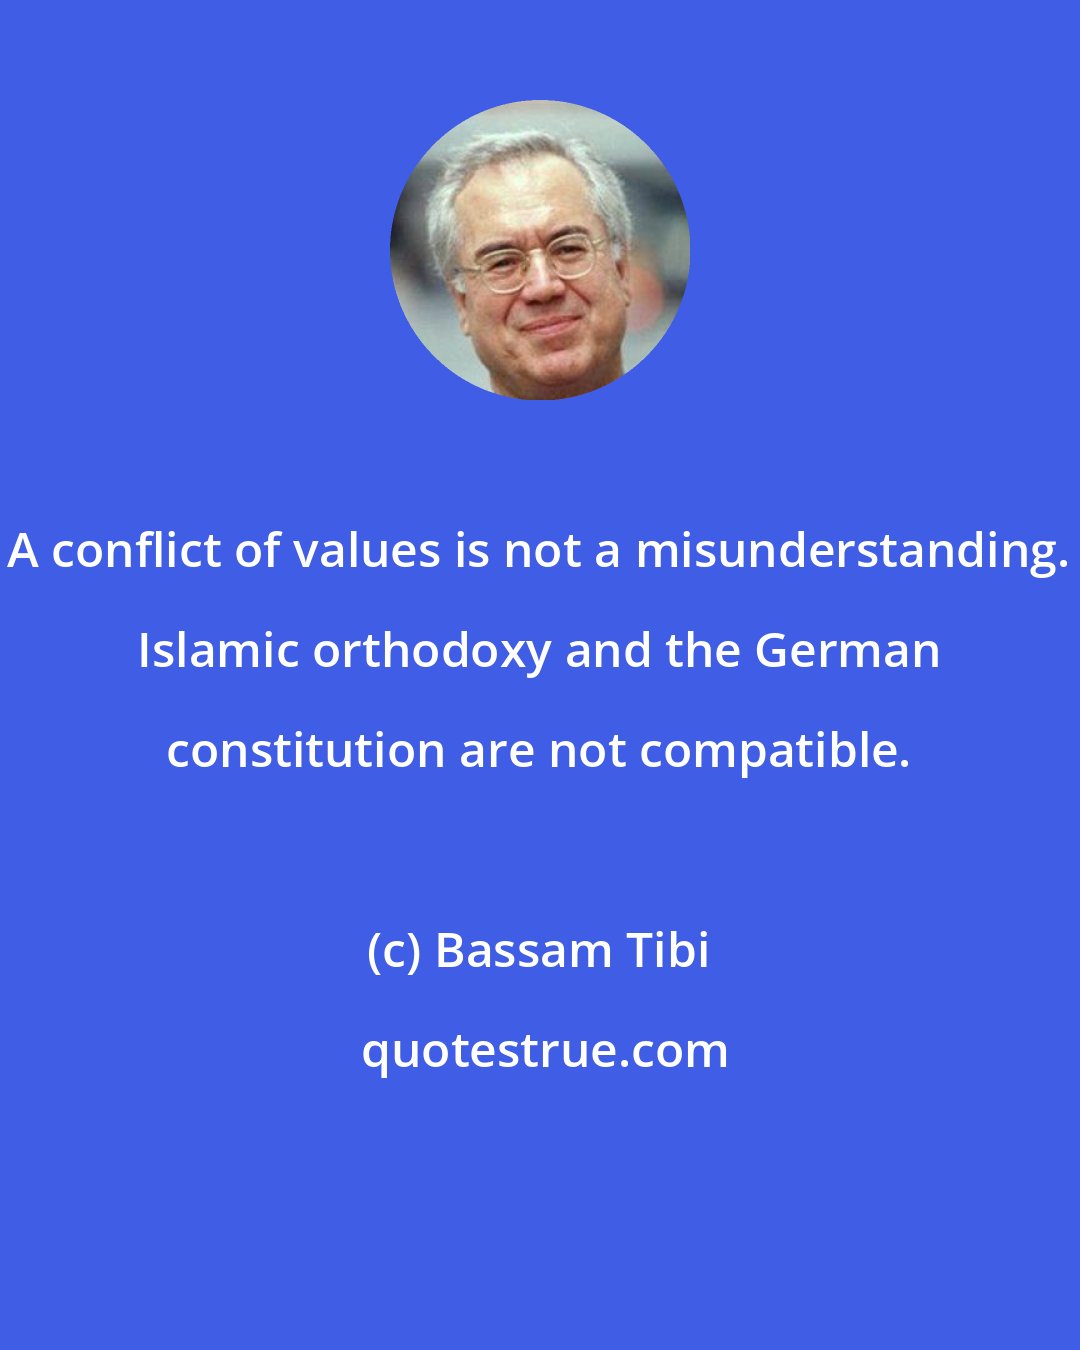 Bassam Tibi: A conflict of values is not a misunderstanding. Islamic orthodoxy and the German constitution are not compatible.